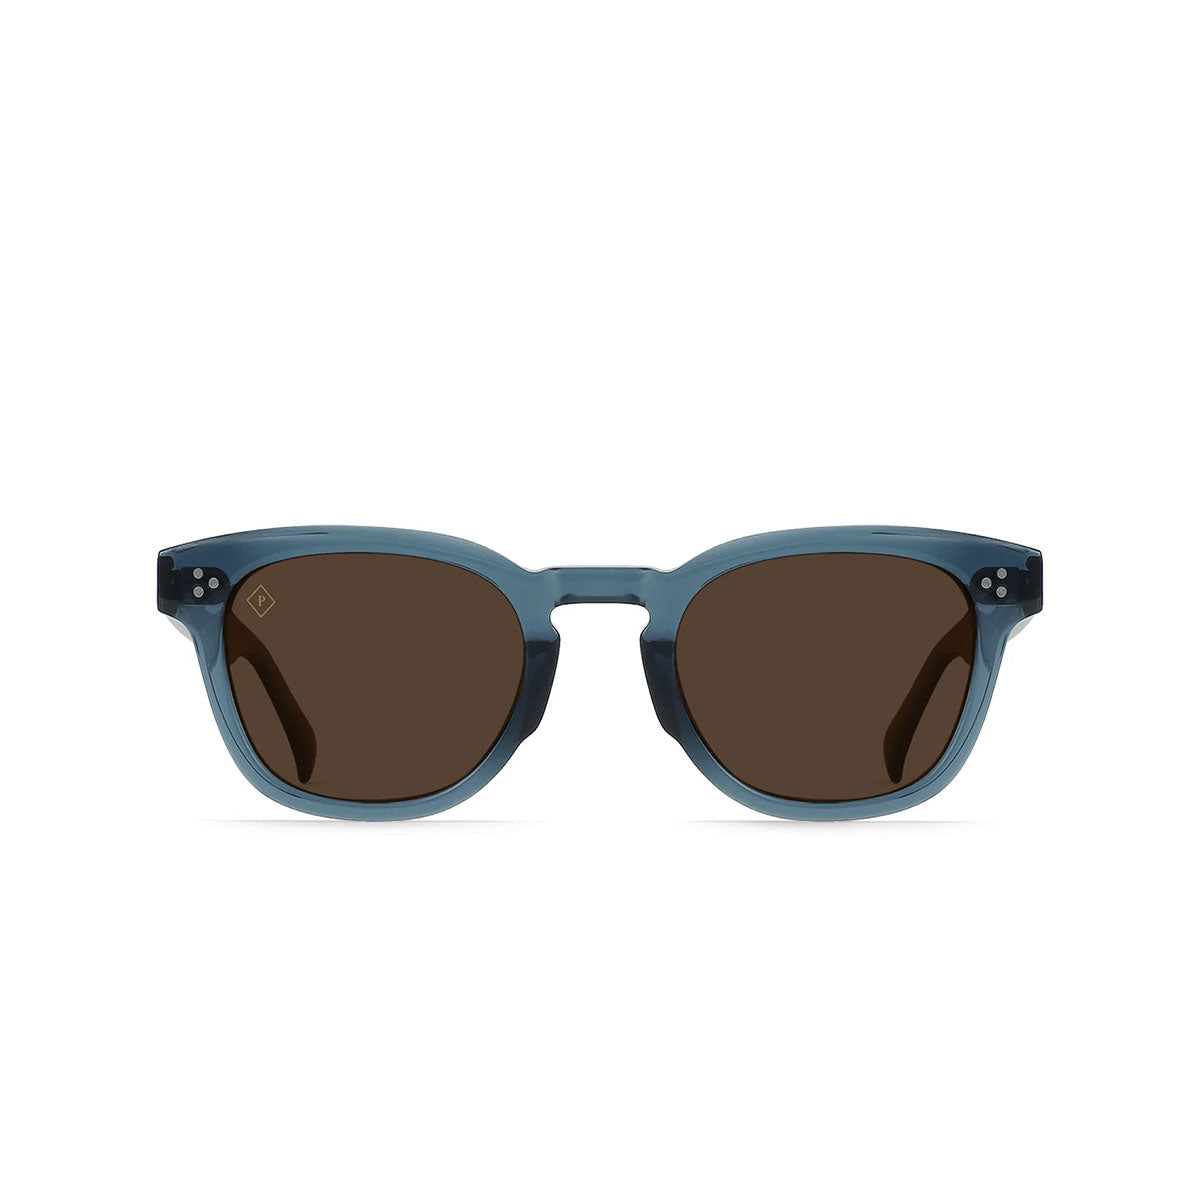 SQUIRE POLARIZED - ABSINTHE / VIBRANT BROWN